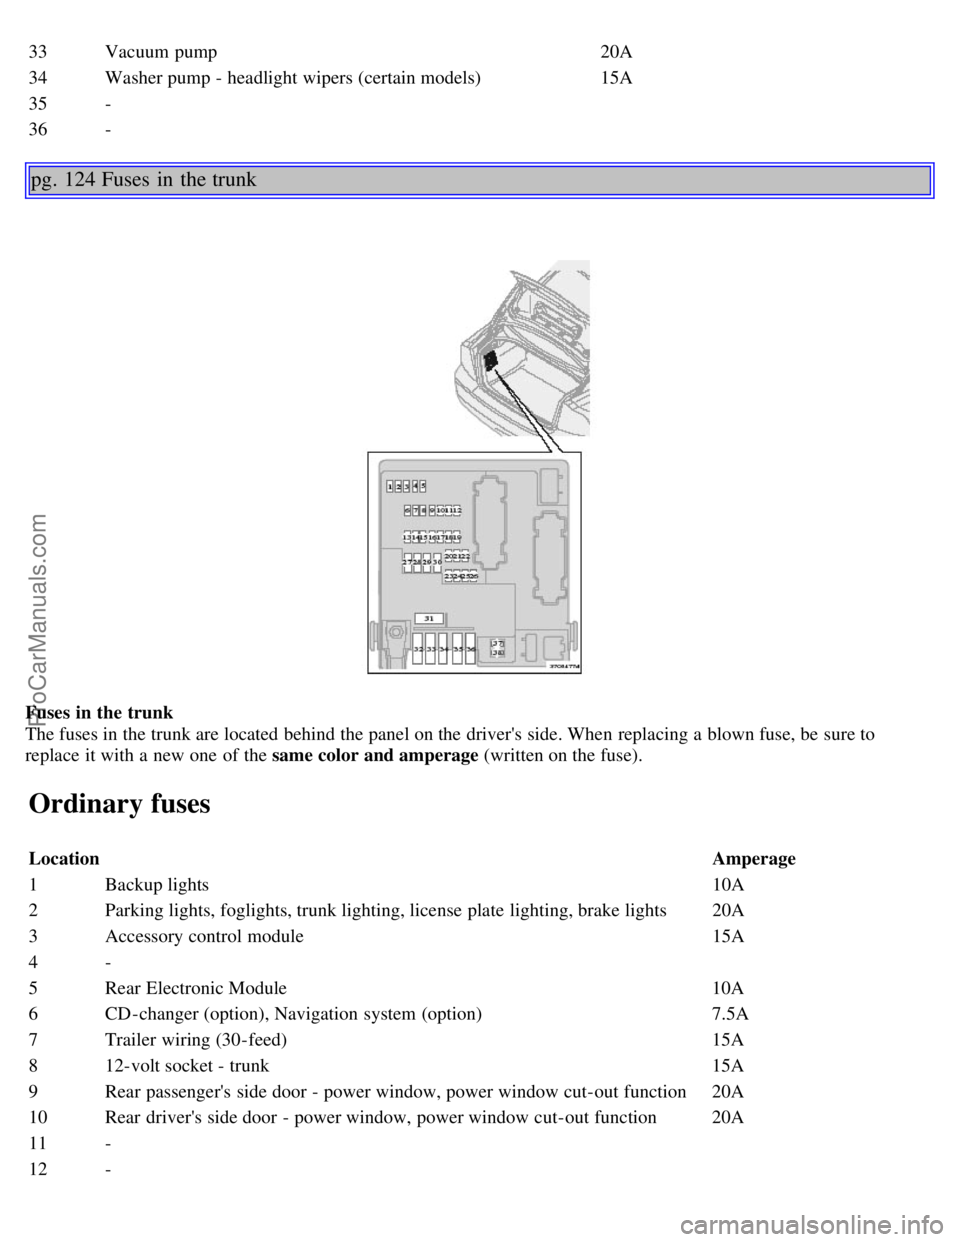 VOLVO S80 2006  Owners Manual 33Vacuum pump 20A
34Washer pump - headlight wipers (certain models) 15A
35 -
36 -
pg. 124 Fuses  in  the trunk
Fuses in the trunk  
The fuses in the trunk are located behind the panel on the drivers 